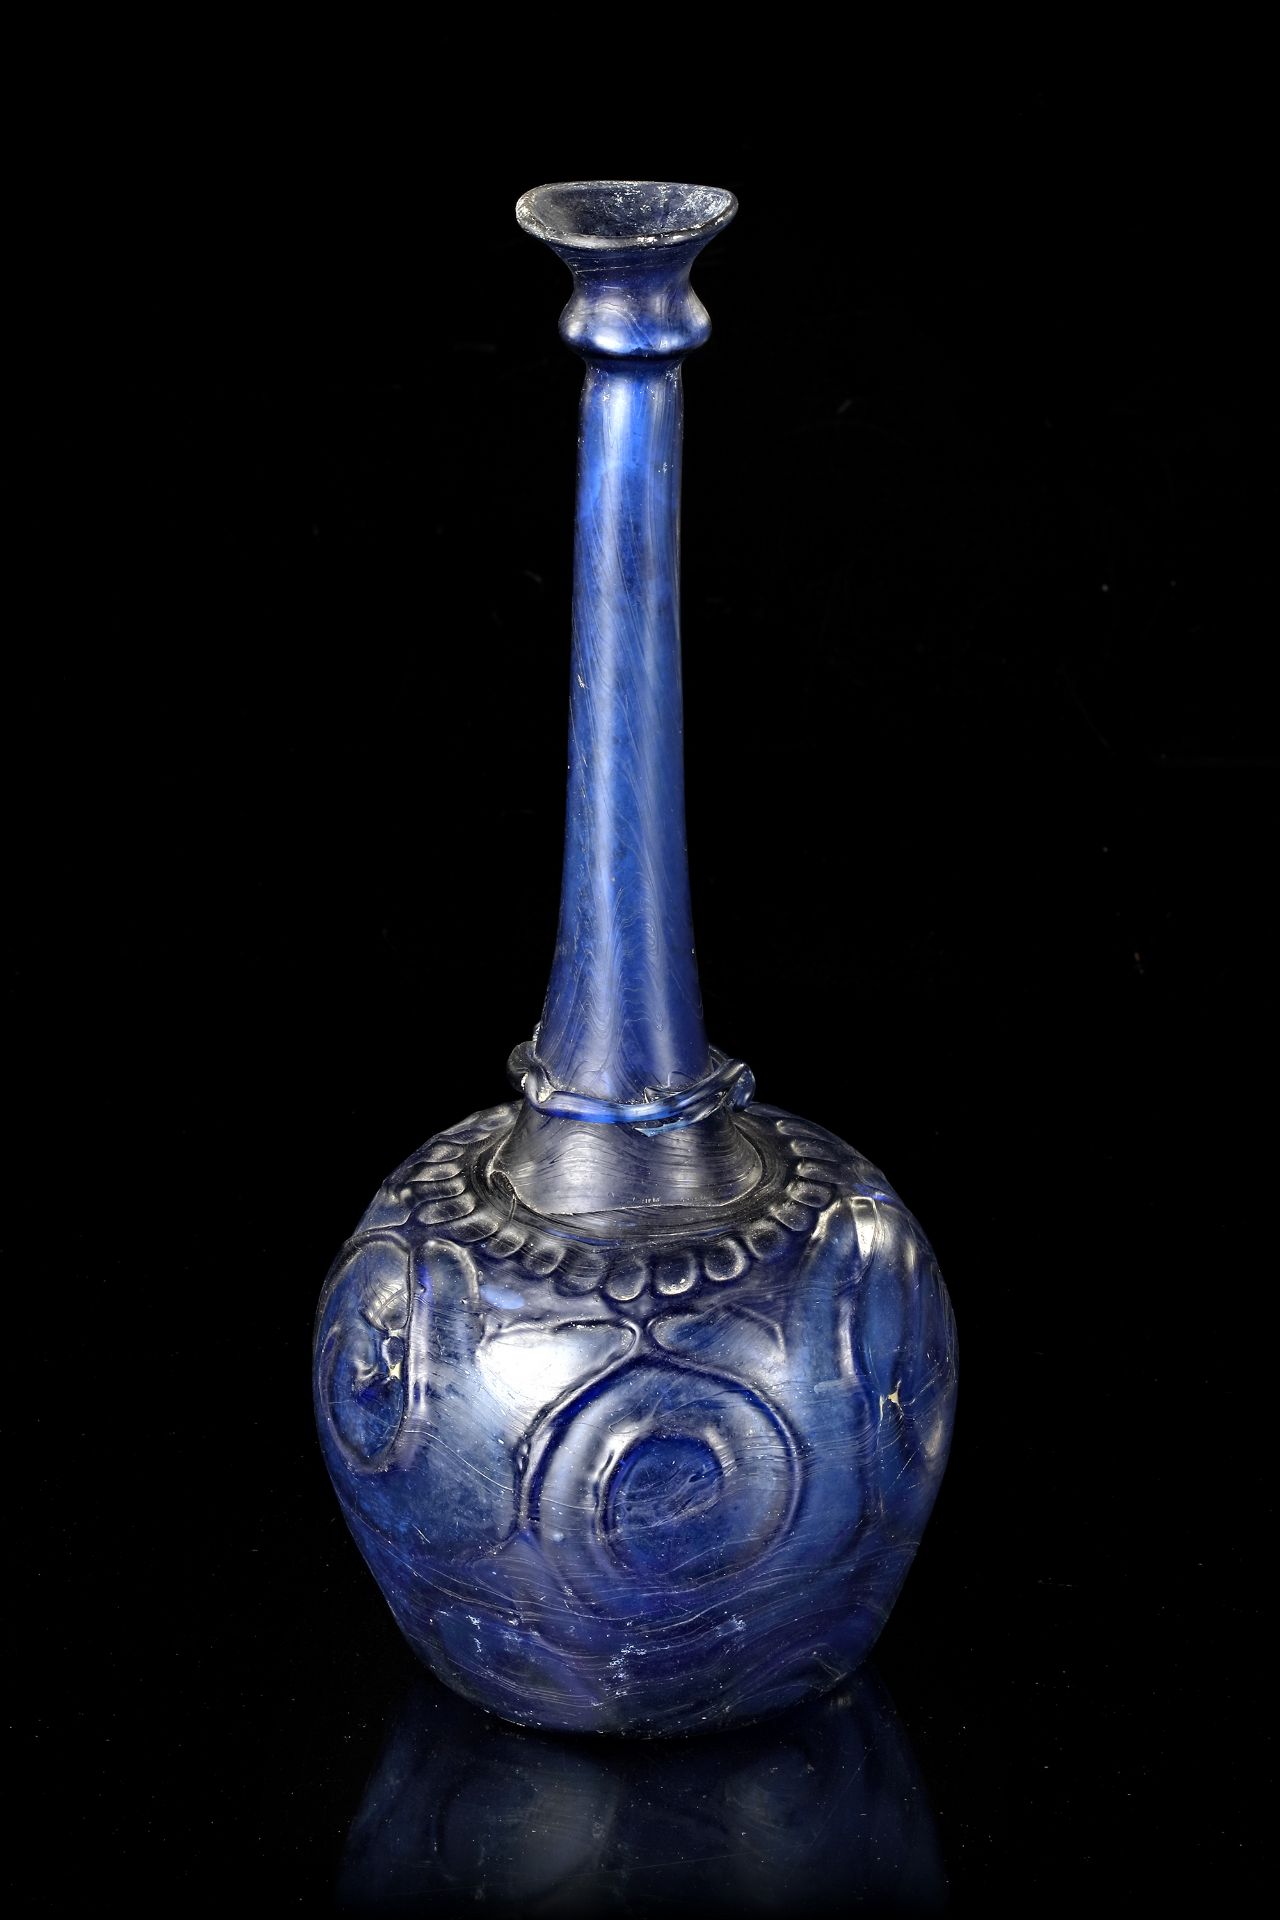 A LARGE MOULD-BLOWN BLUE GLASS BOTTLE-VASE OR SPRINKLER, PERSIA, 12TH CENTURY - Image 2 of 4